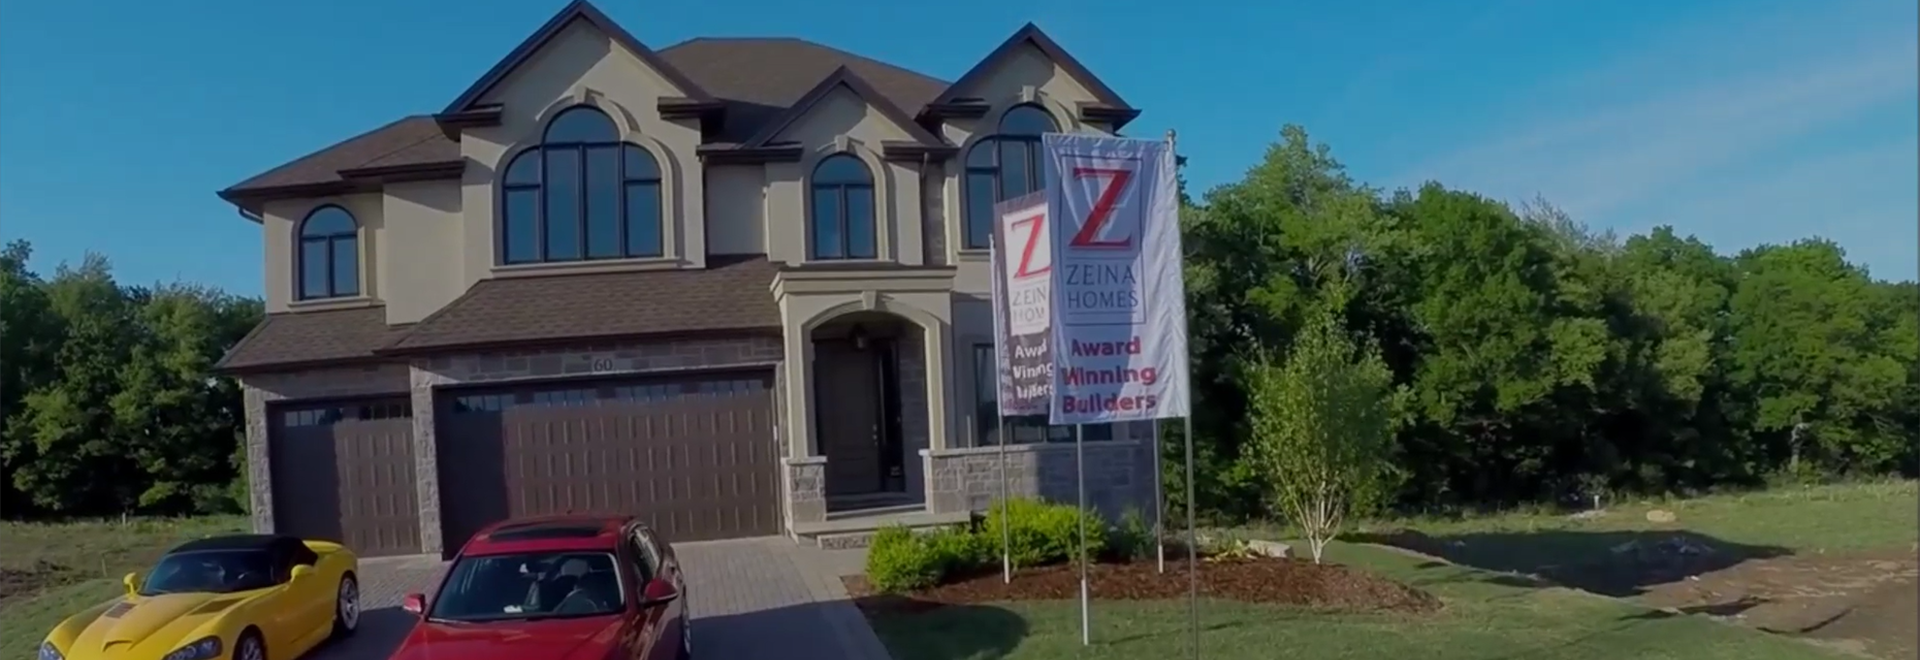 Home Builders St. Catharines, Fonthill, Welland, Niagara Falls